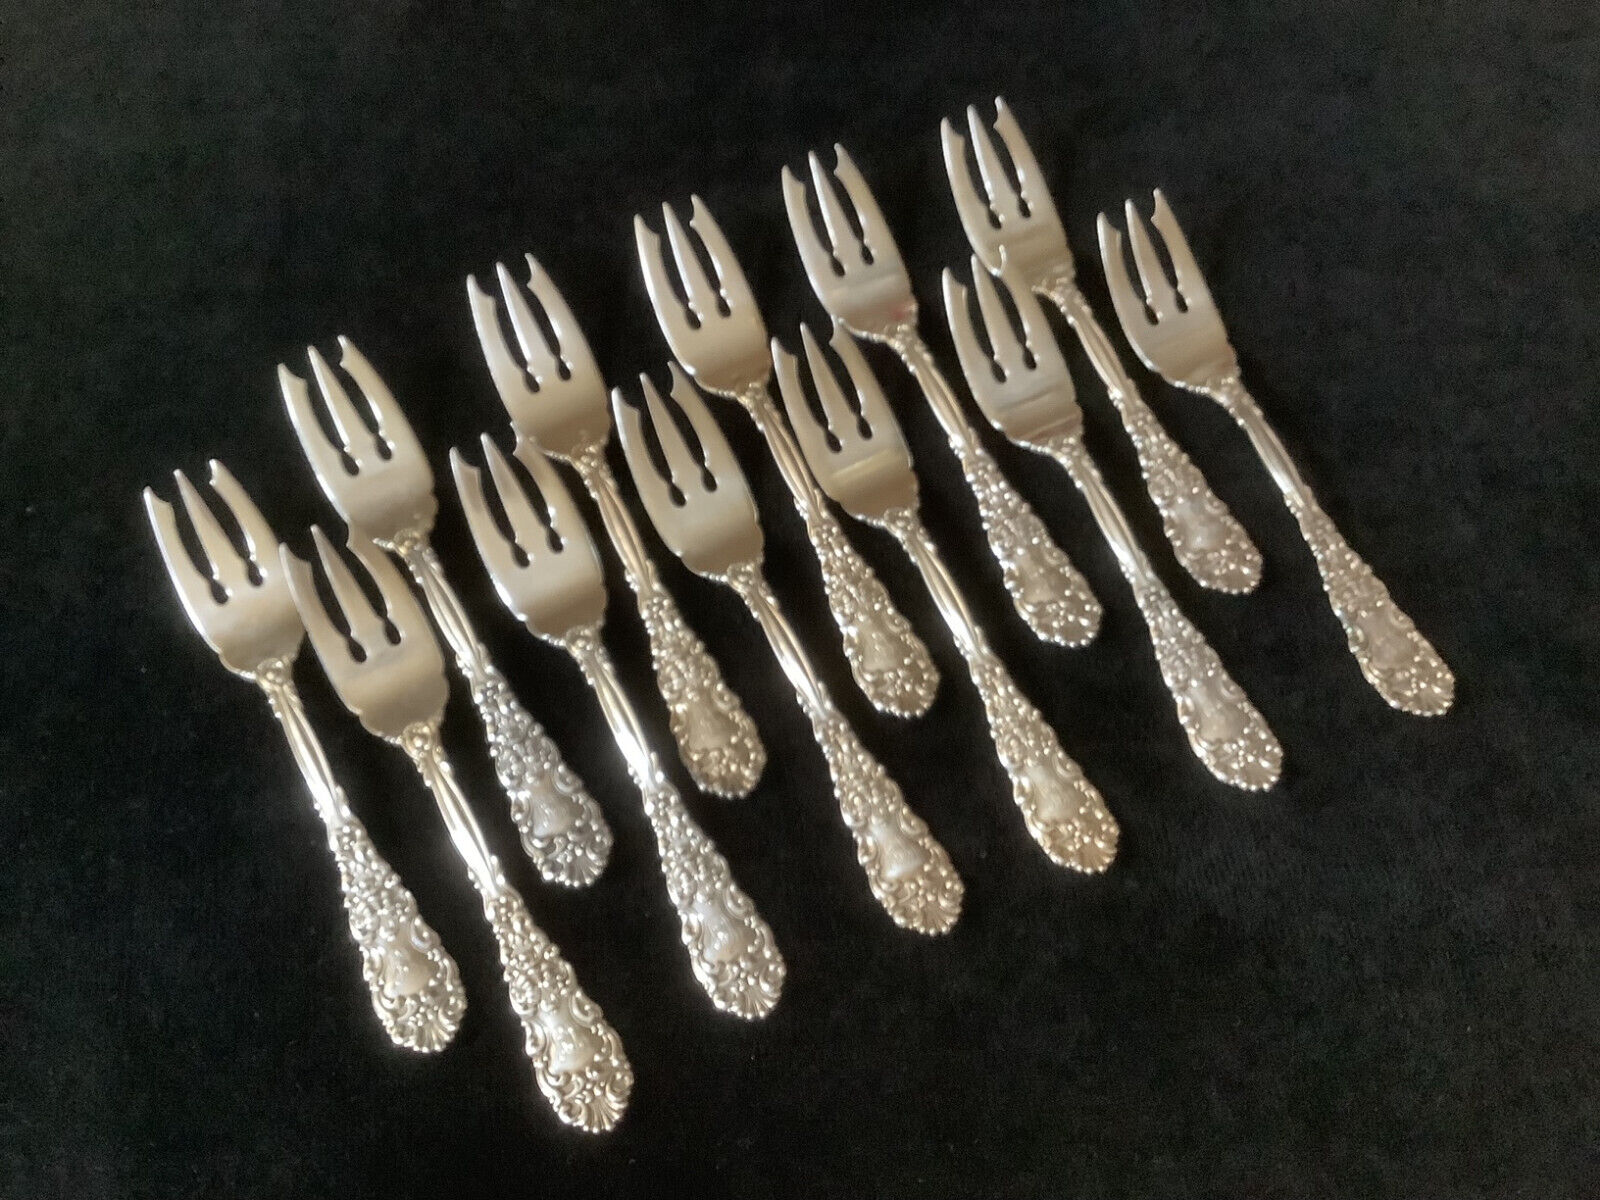 Dominick and Haff RENAISSANCE set of 12 pastry / fish forks - mono